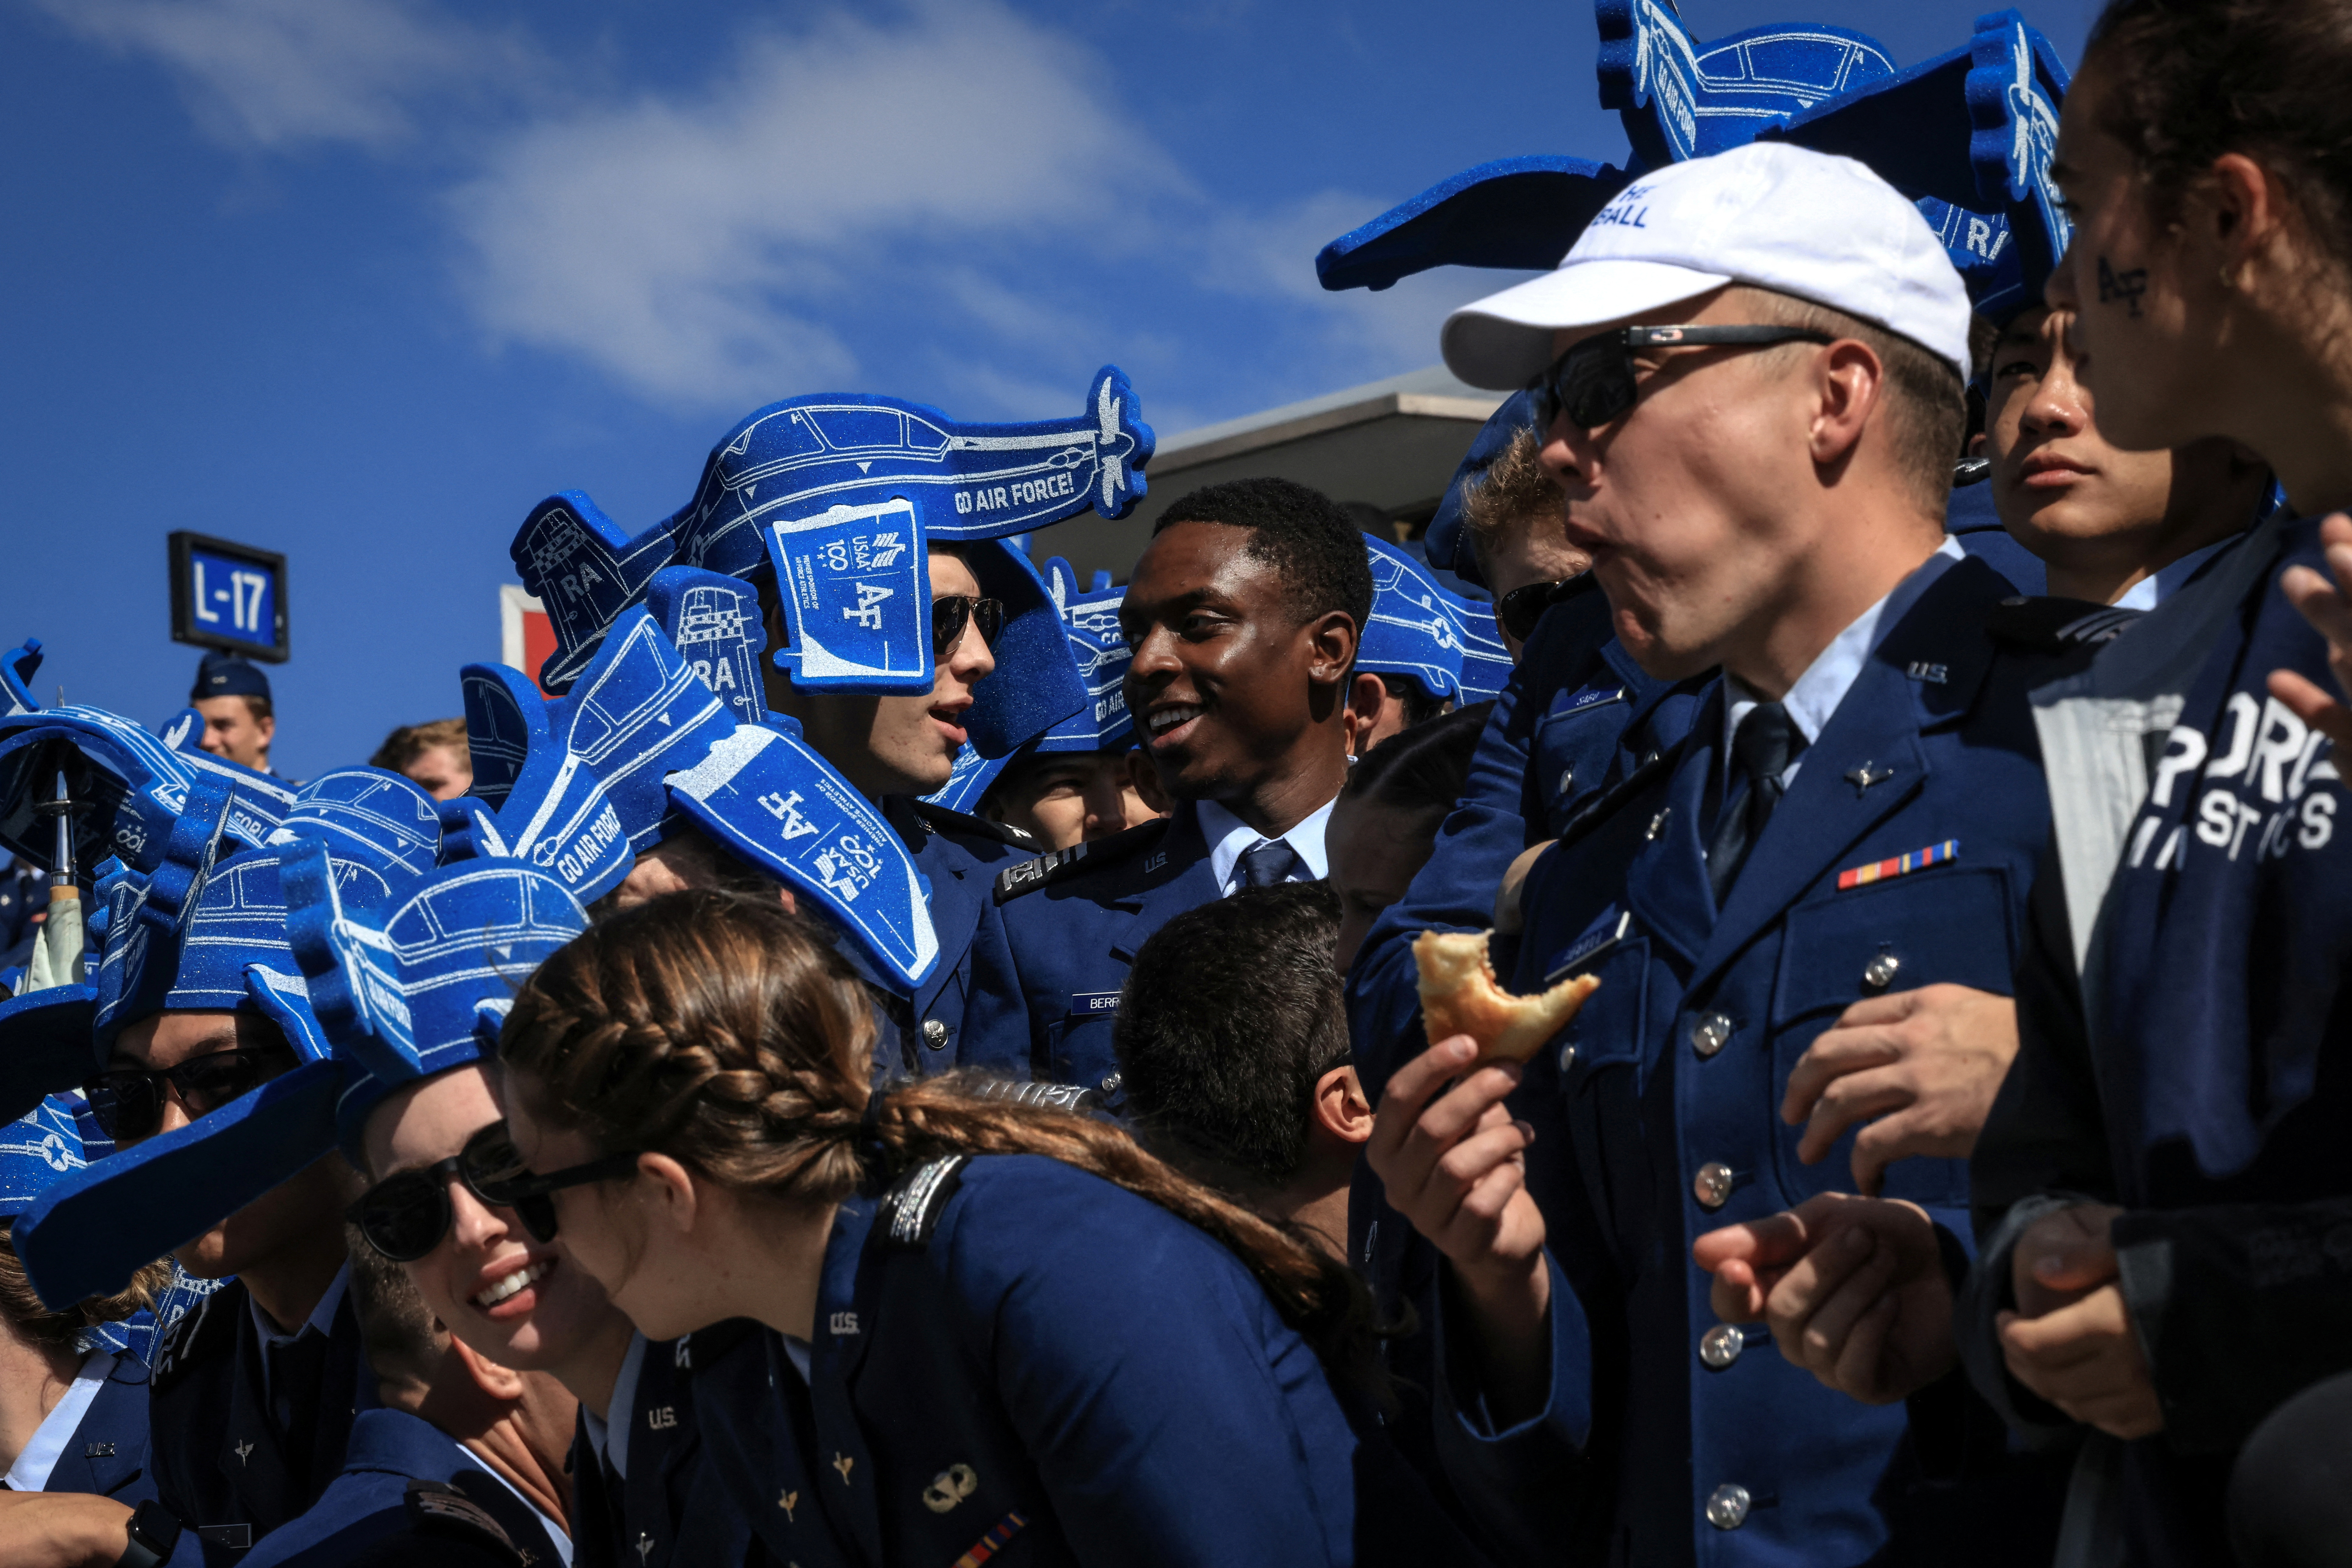 Two cadets, one first year at the U.S. Air Force Academy